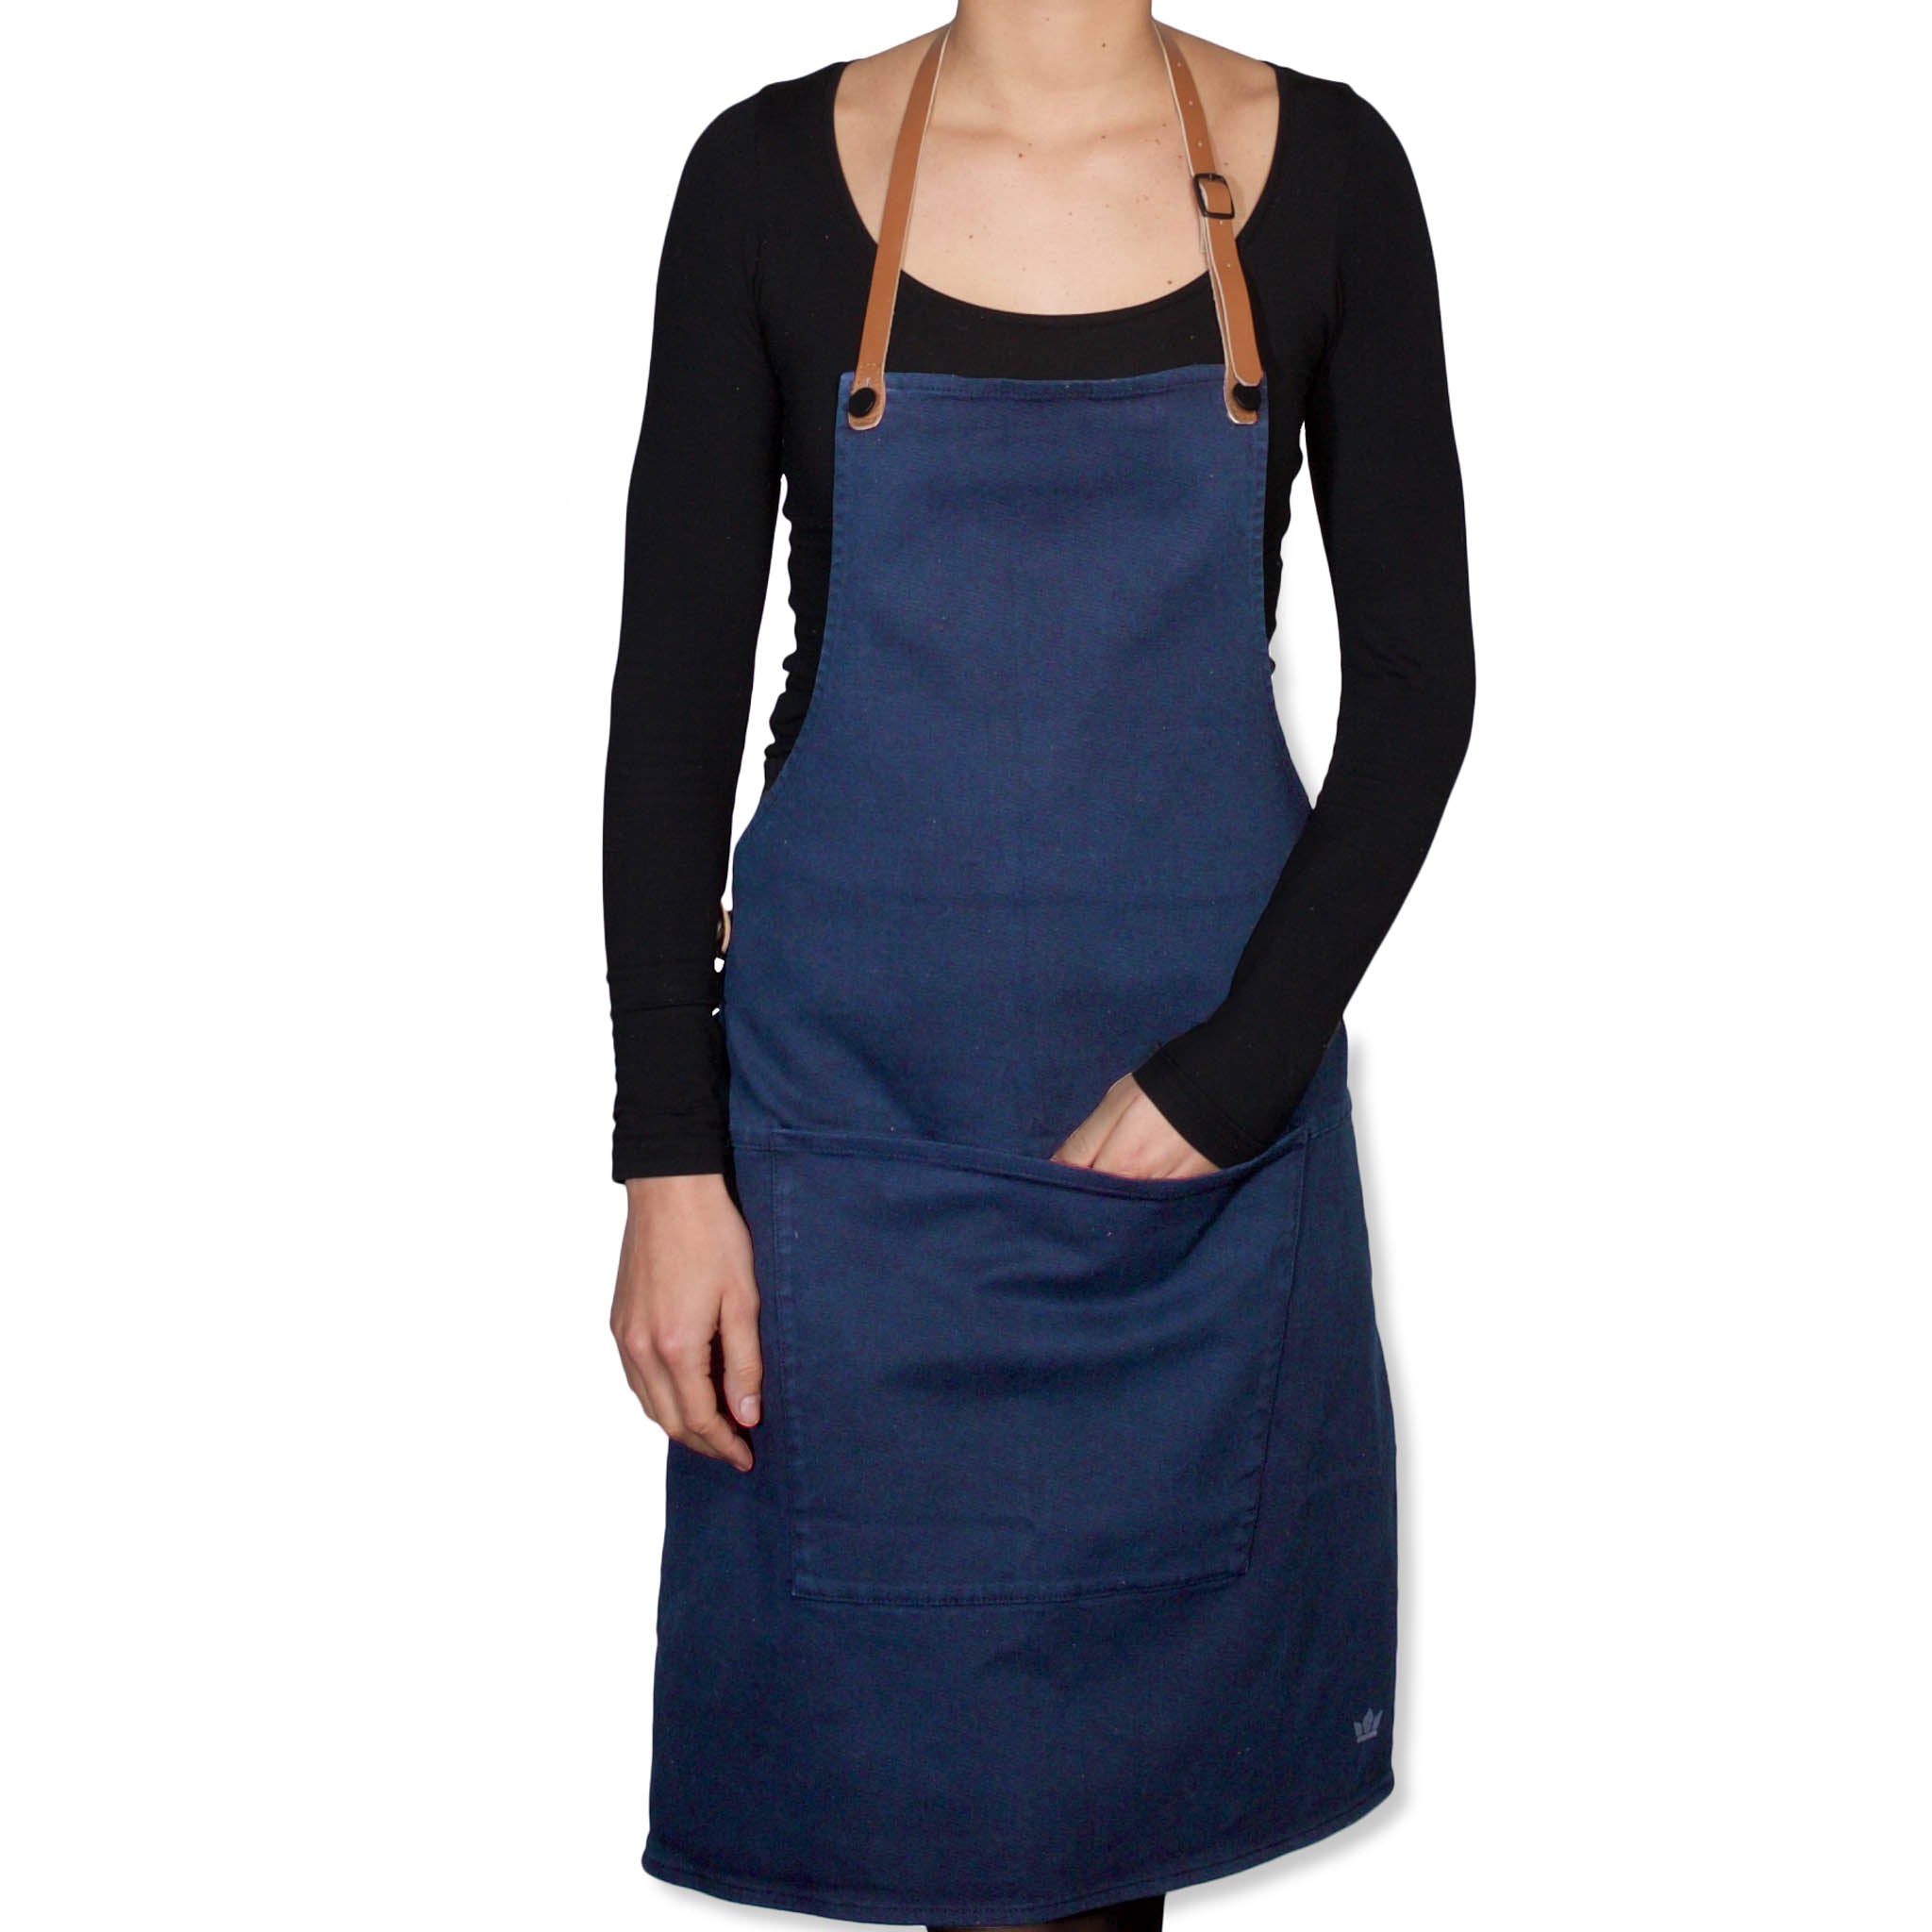 Dutchdeluxes Canvas BBQ Apron in Dark Blue Cookware Kitchen Clothing